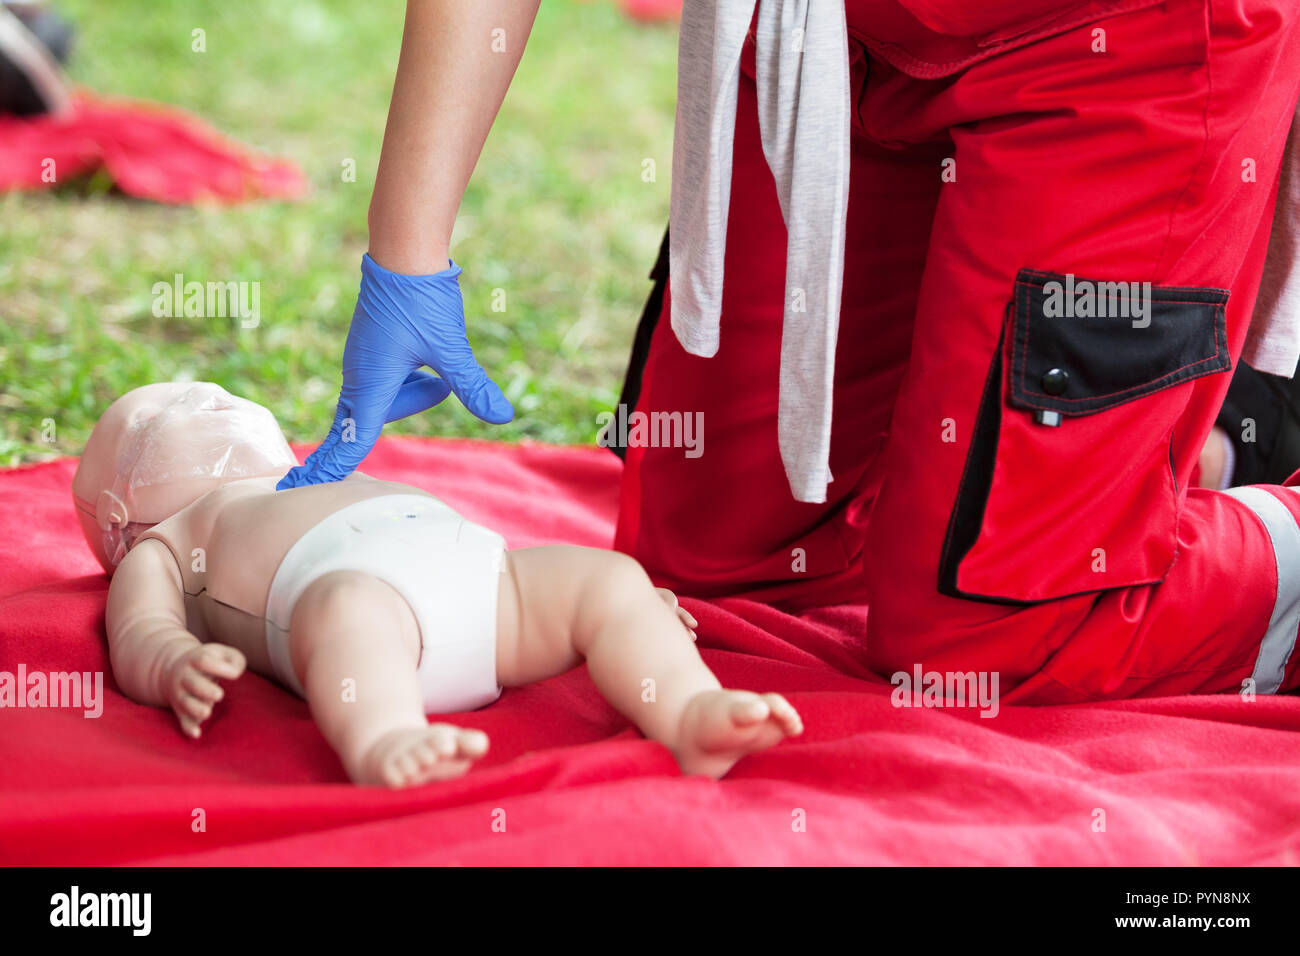 Demonstration of cardiopulmonary resuscitation on a cpr infant dummy during first aid training. Stock Photo